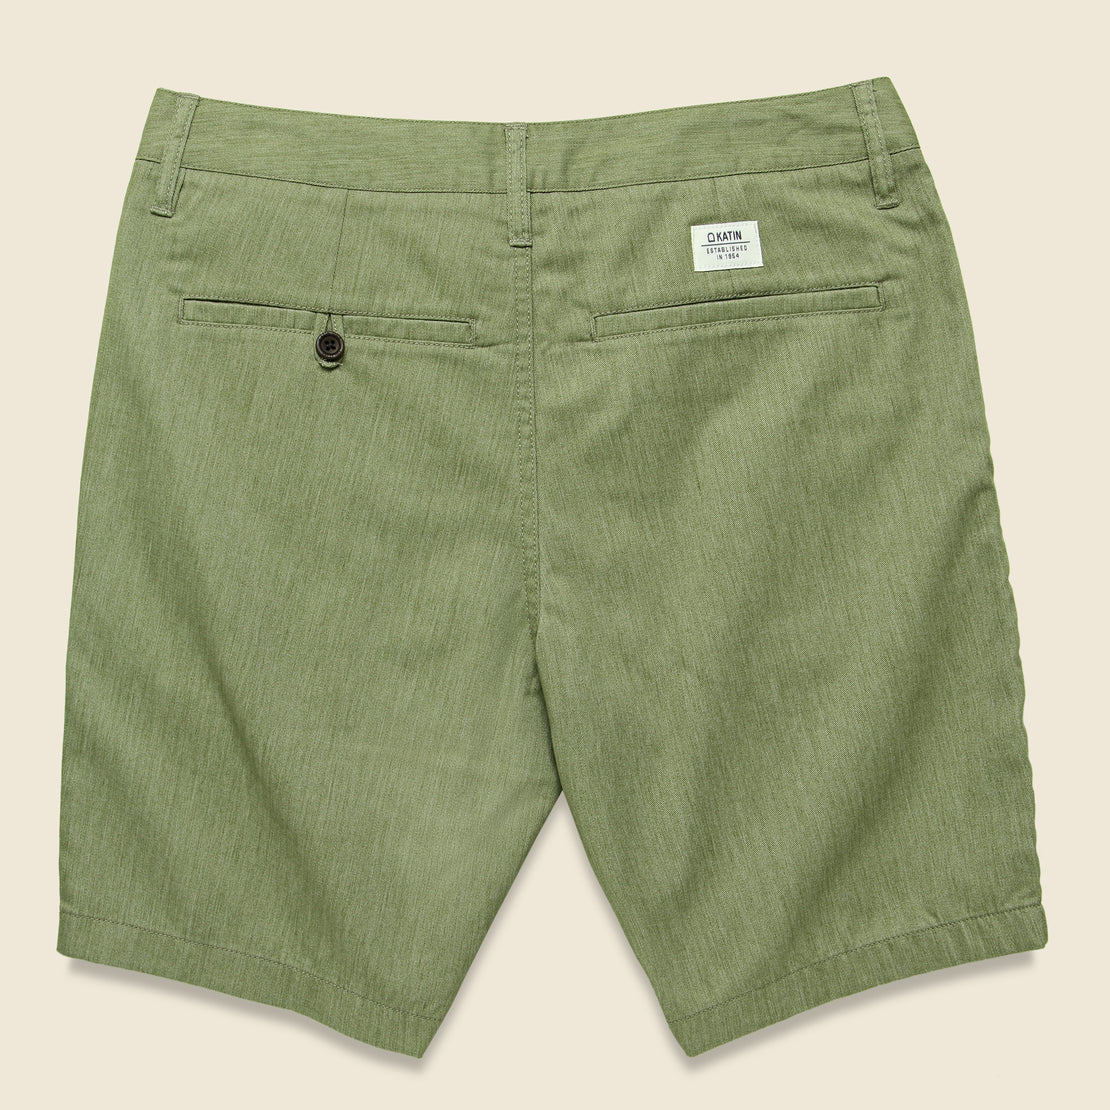 Court Short - Cactus - Katin - STAG Provisions - Shorts - Solid